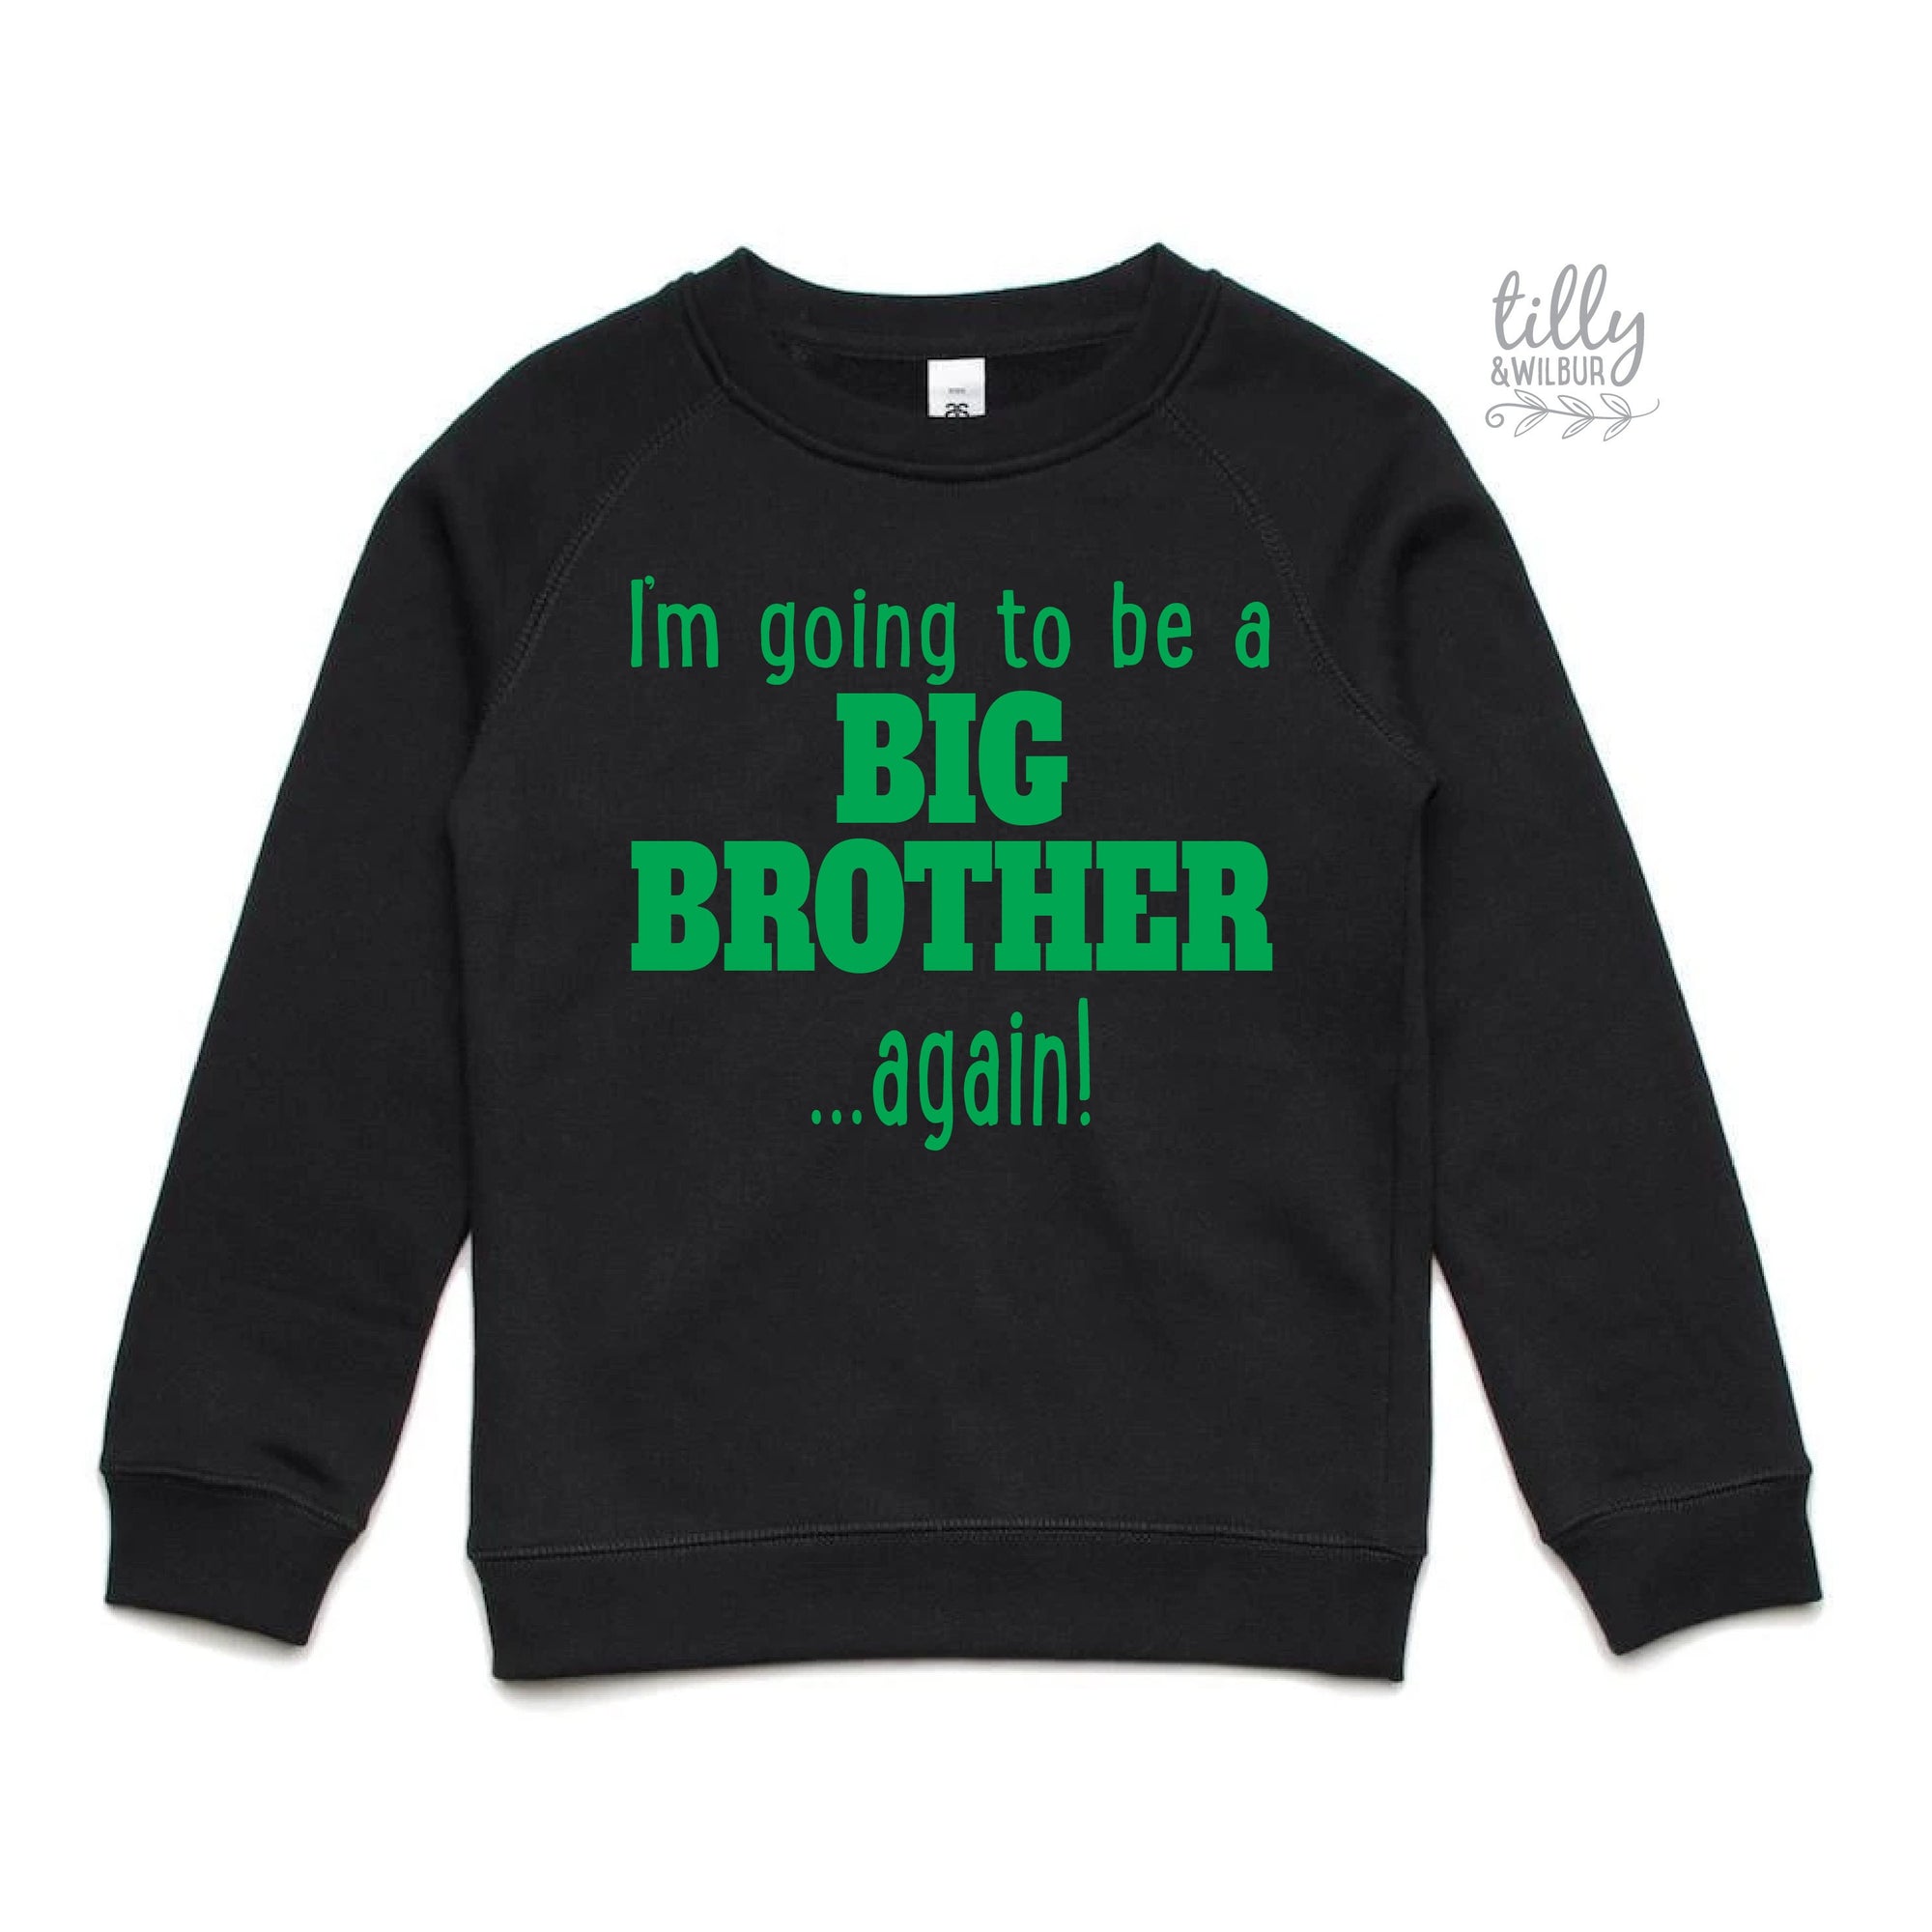 I'm Going To Be A Big Brother... Again! Big Brother Again Shirt, Big Brother Sweatshirt, Pregnancy Announcement, Sibling Shirt, Brother Tee